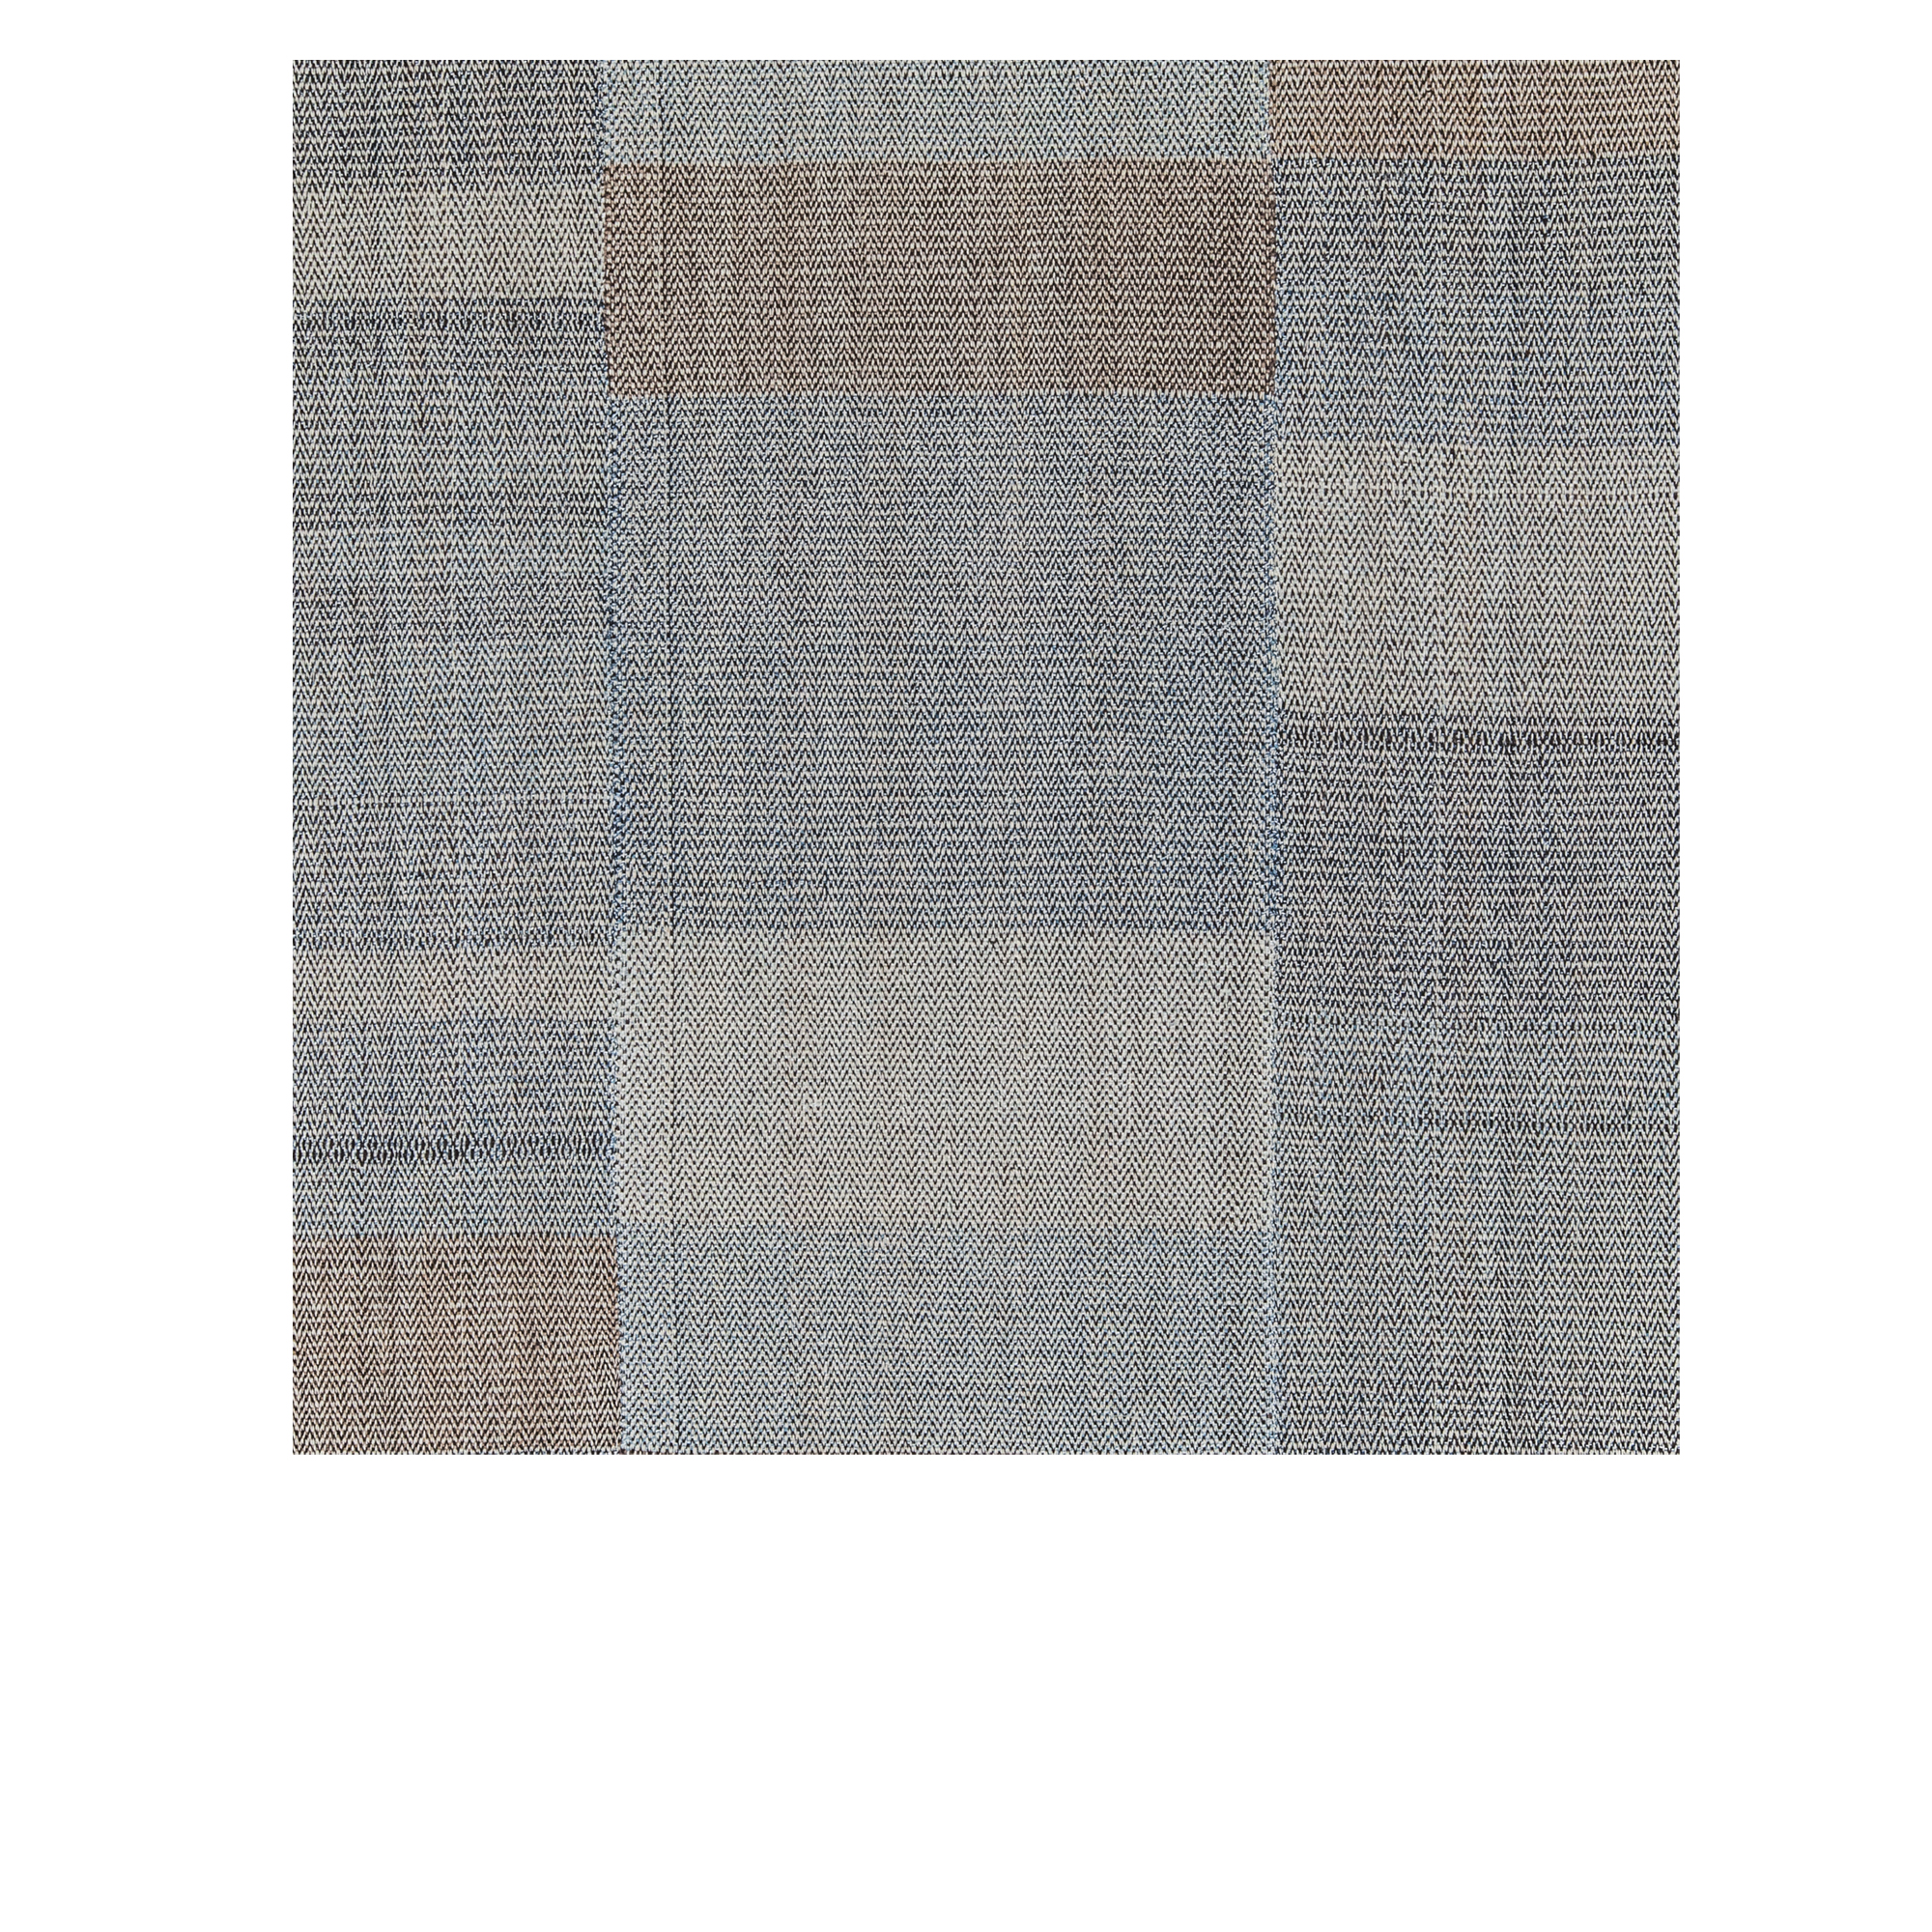 This Charmo flatweave rug is hand-woven and made of 100% wool.